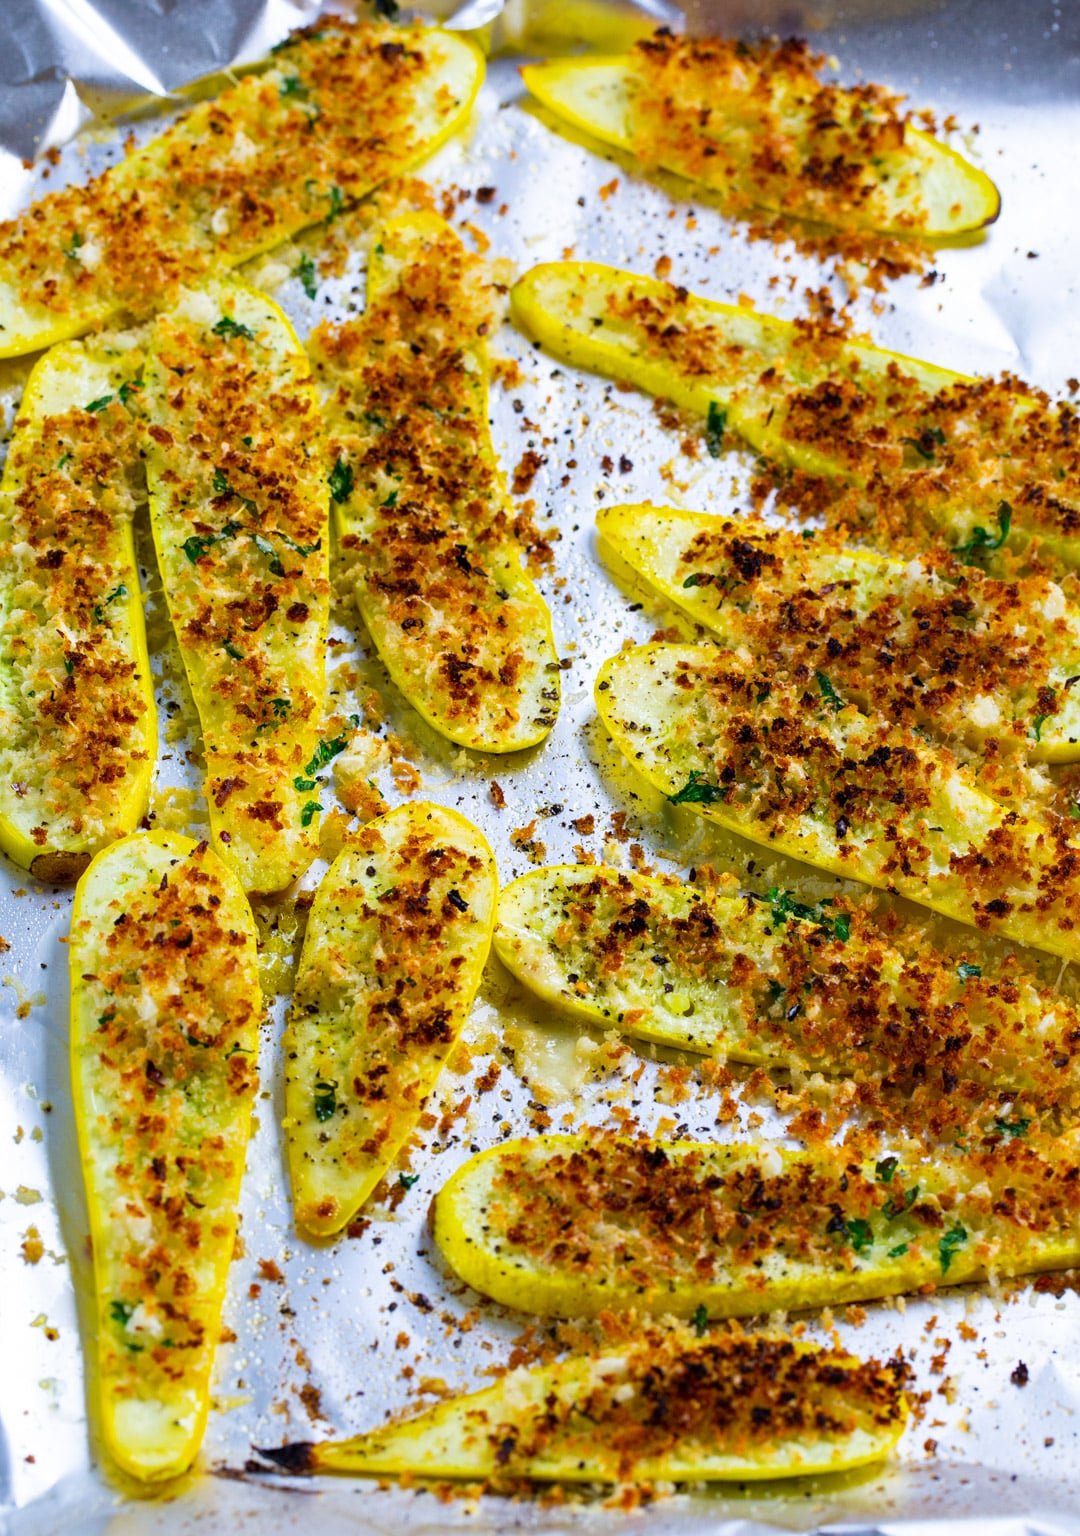 Squash slices topped with panko crumbs on baking sheet.